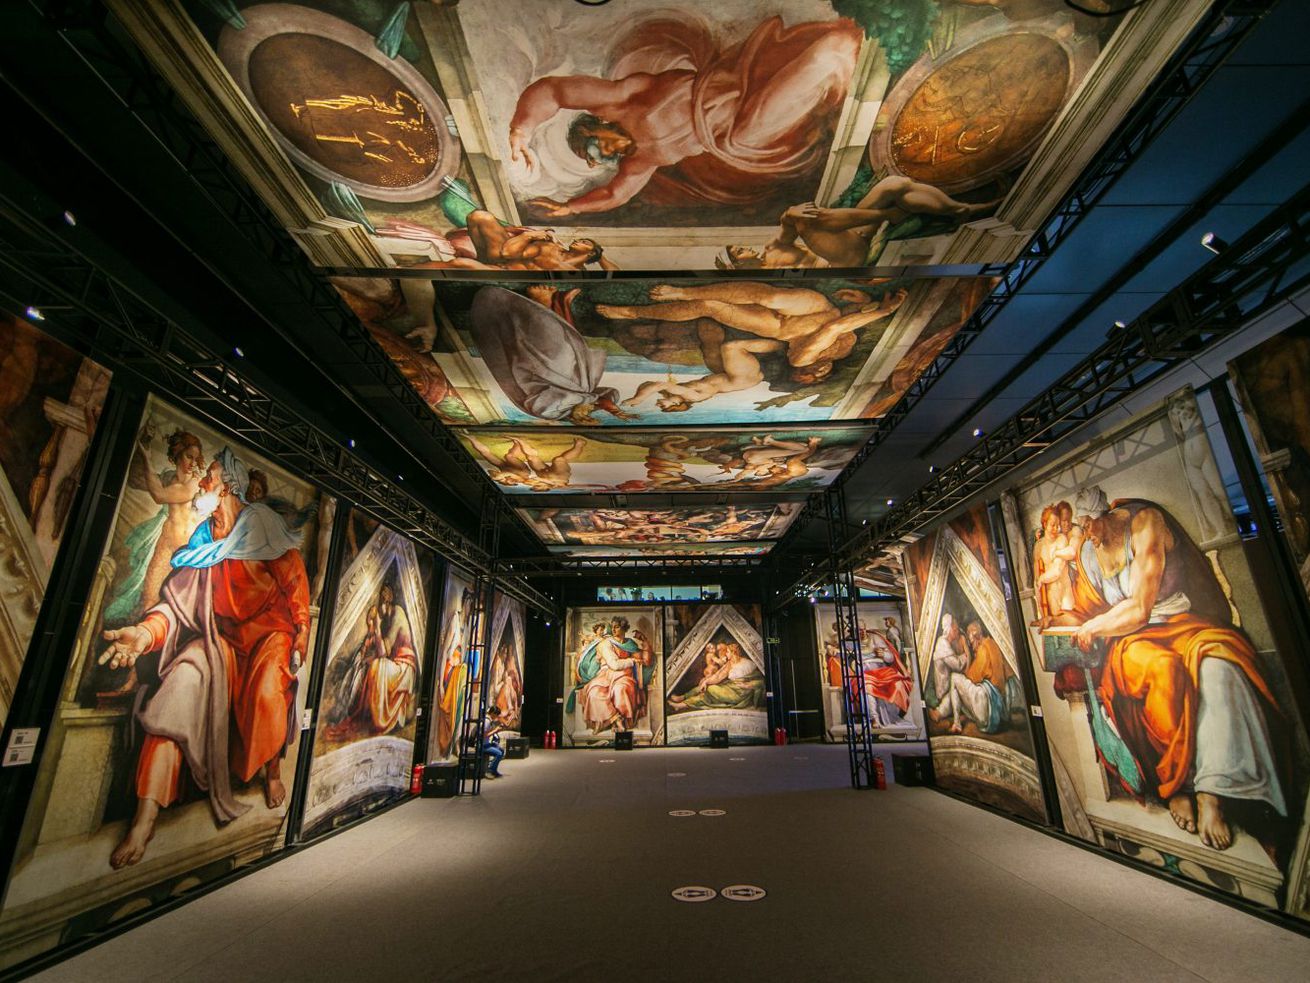 You can walk among life-sized reproductions of a fresco masterpiece when you visit “Michelangelo’s  Sistine Chapel: The Exhibition” in Oakbrook Center.